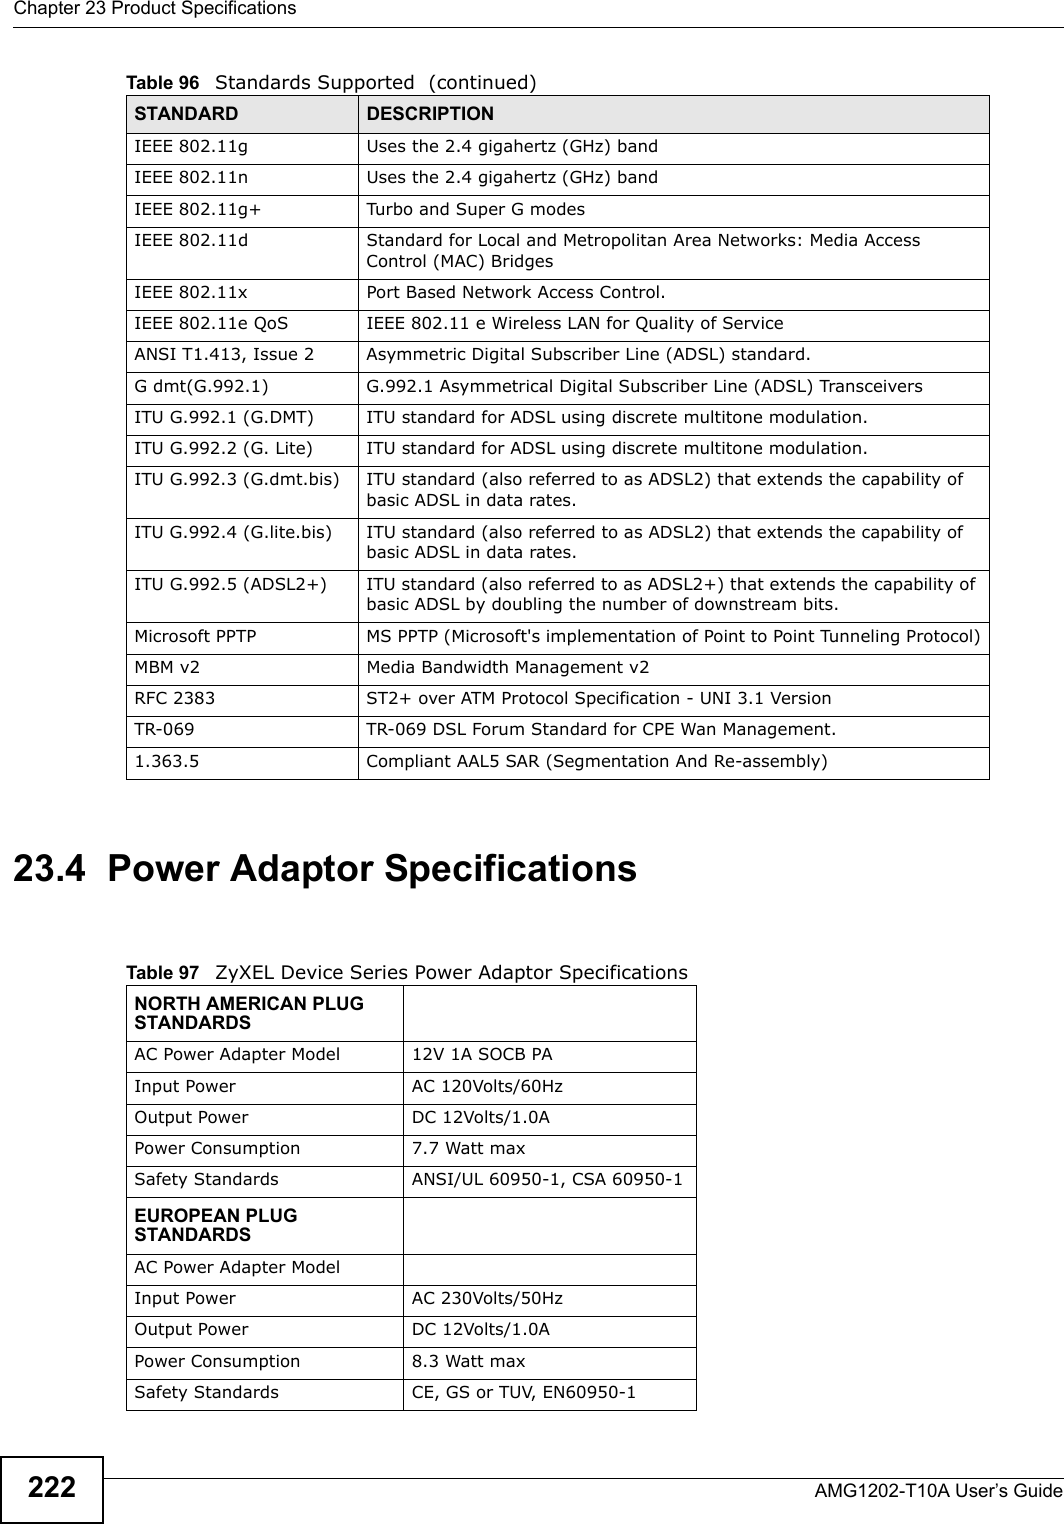 Chapter 23 Product SpecificationsAMG1202-T10A User’s Guide22223.4  Power Adaptor SpecificationsIEEE 802.11g Uses the 2.4 gigahertz (GHz) bandIEEE 802.11n Uses the 2.4 gigahertz (GHz) bandIEEE 802.11g+ Turbo and Super G modesIEEE 802.11d Standard for Local and Metropolitan Area Networks: Media Access Control (MAC) BridgesIEEE 802.11x Port Based Network Access Control.IEEE 802.11e QoS IEEE 802.11 e Wireless LAN for Quality of ServiceANSI T1.413, Issue 2 Asymmetric Digital Subscriber Line (ADSL) standard.G dmt(G.992.1) G.992.1 Asymmetrical Digital Subscriber Line (ADSL) TransceiversITU G.992.1 (G.DMT) ITU standard for ADSL using discrete multitone modulation.ITU G.992.2 (G. Lite) ITU standard for ADSL using discrete multitone modulation.ITU G.992.3 (G.dmt.bis) ITU standard (also referred to as ADSL2) that extends the capability of basic ADSL in data rates.ITU G.992.4 (G.lite.bis) ITU standard (also referred to as ADSL2) that extends the capability of basic ADSL in data rates.ITU G.992.5 (ADSL2+) ITU standard (also referred to as ADSL2+) that extends the capability of basic ADSL by doubling the number of downstream bits.Microsoft PPTP MS PPTP (Microsoft&apos;s implementation of Point to Point Tunneling Protocol)MBM v2 Media Bandwidth Management v2RFC 2383 ST2+ over ATM Protocol Specification - UNI 3.1 VersionTR-069 TR-069 DSL Forum Standard for CPE Wan Management.1.363.5 Compliant AAL5 SAR (Segmentation And Re-assembly) Table 96   Standards Supported  (continued)STANDARD DESCRIPTIONTable 97   ZyXEL Device Series Power Adaptor SpecificationsNORTH AMERICAN PLUG STANDARDSAC Power Adapter Model  12V 1A SOCB PAInput Power AC 120Volts/60HzOutput Power  DC 12Volts/1.0APower Consumption 7.7 Watt maxSafety Standards  ANSI/UL 60950-1, CSA 60950-1EUROPEAN PLUG STANDARDSAC Power Adapter ModelInput Power AC 230Volts/50HzOutput Power DC 12Volts/1.0APower Consumption 8.3 Watt maxSafety Standards CE, GS or TUV, EN60950-1